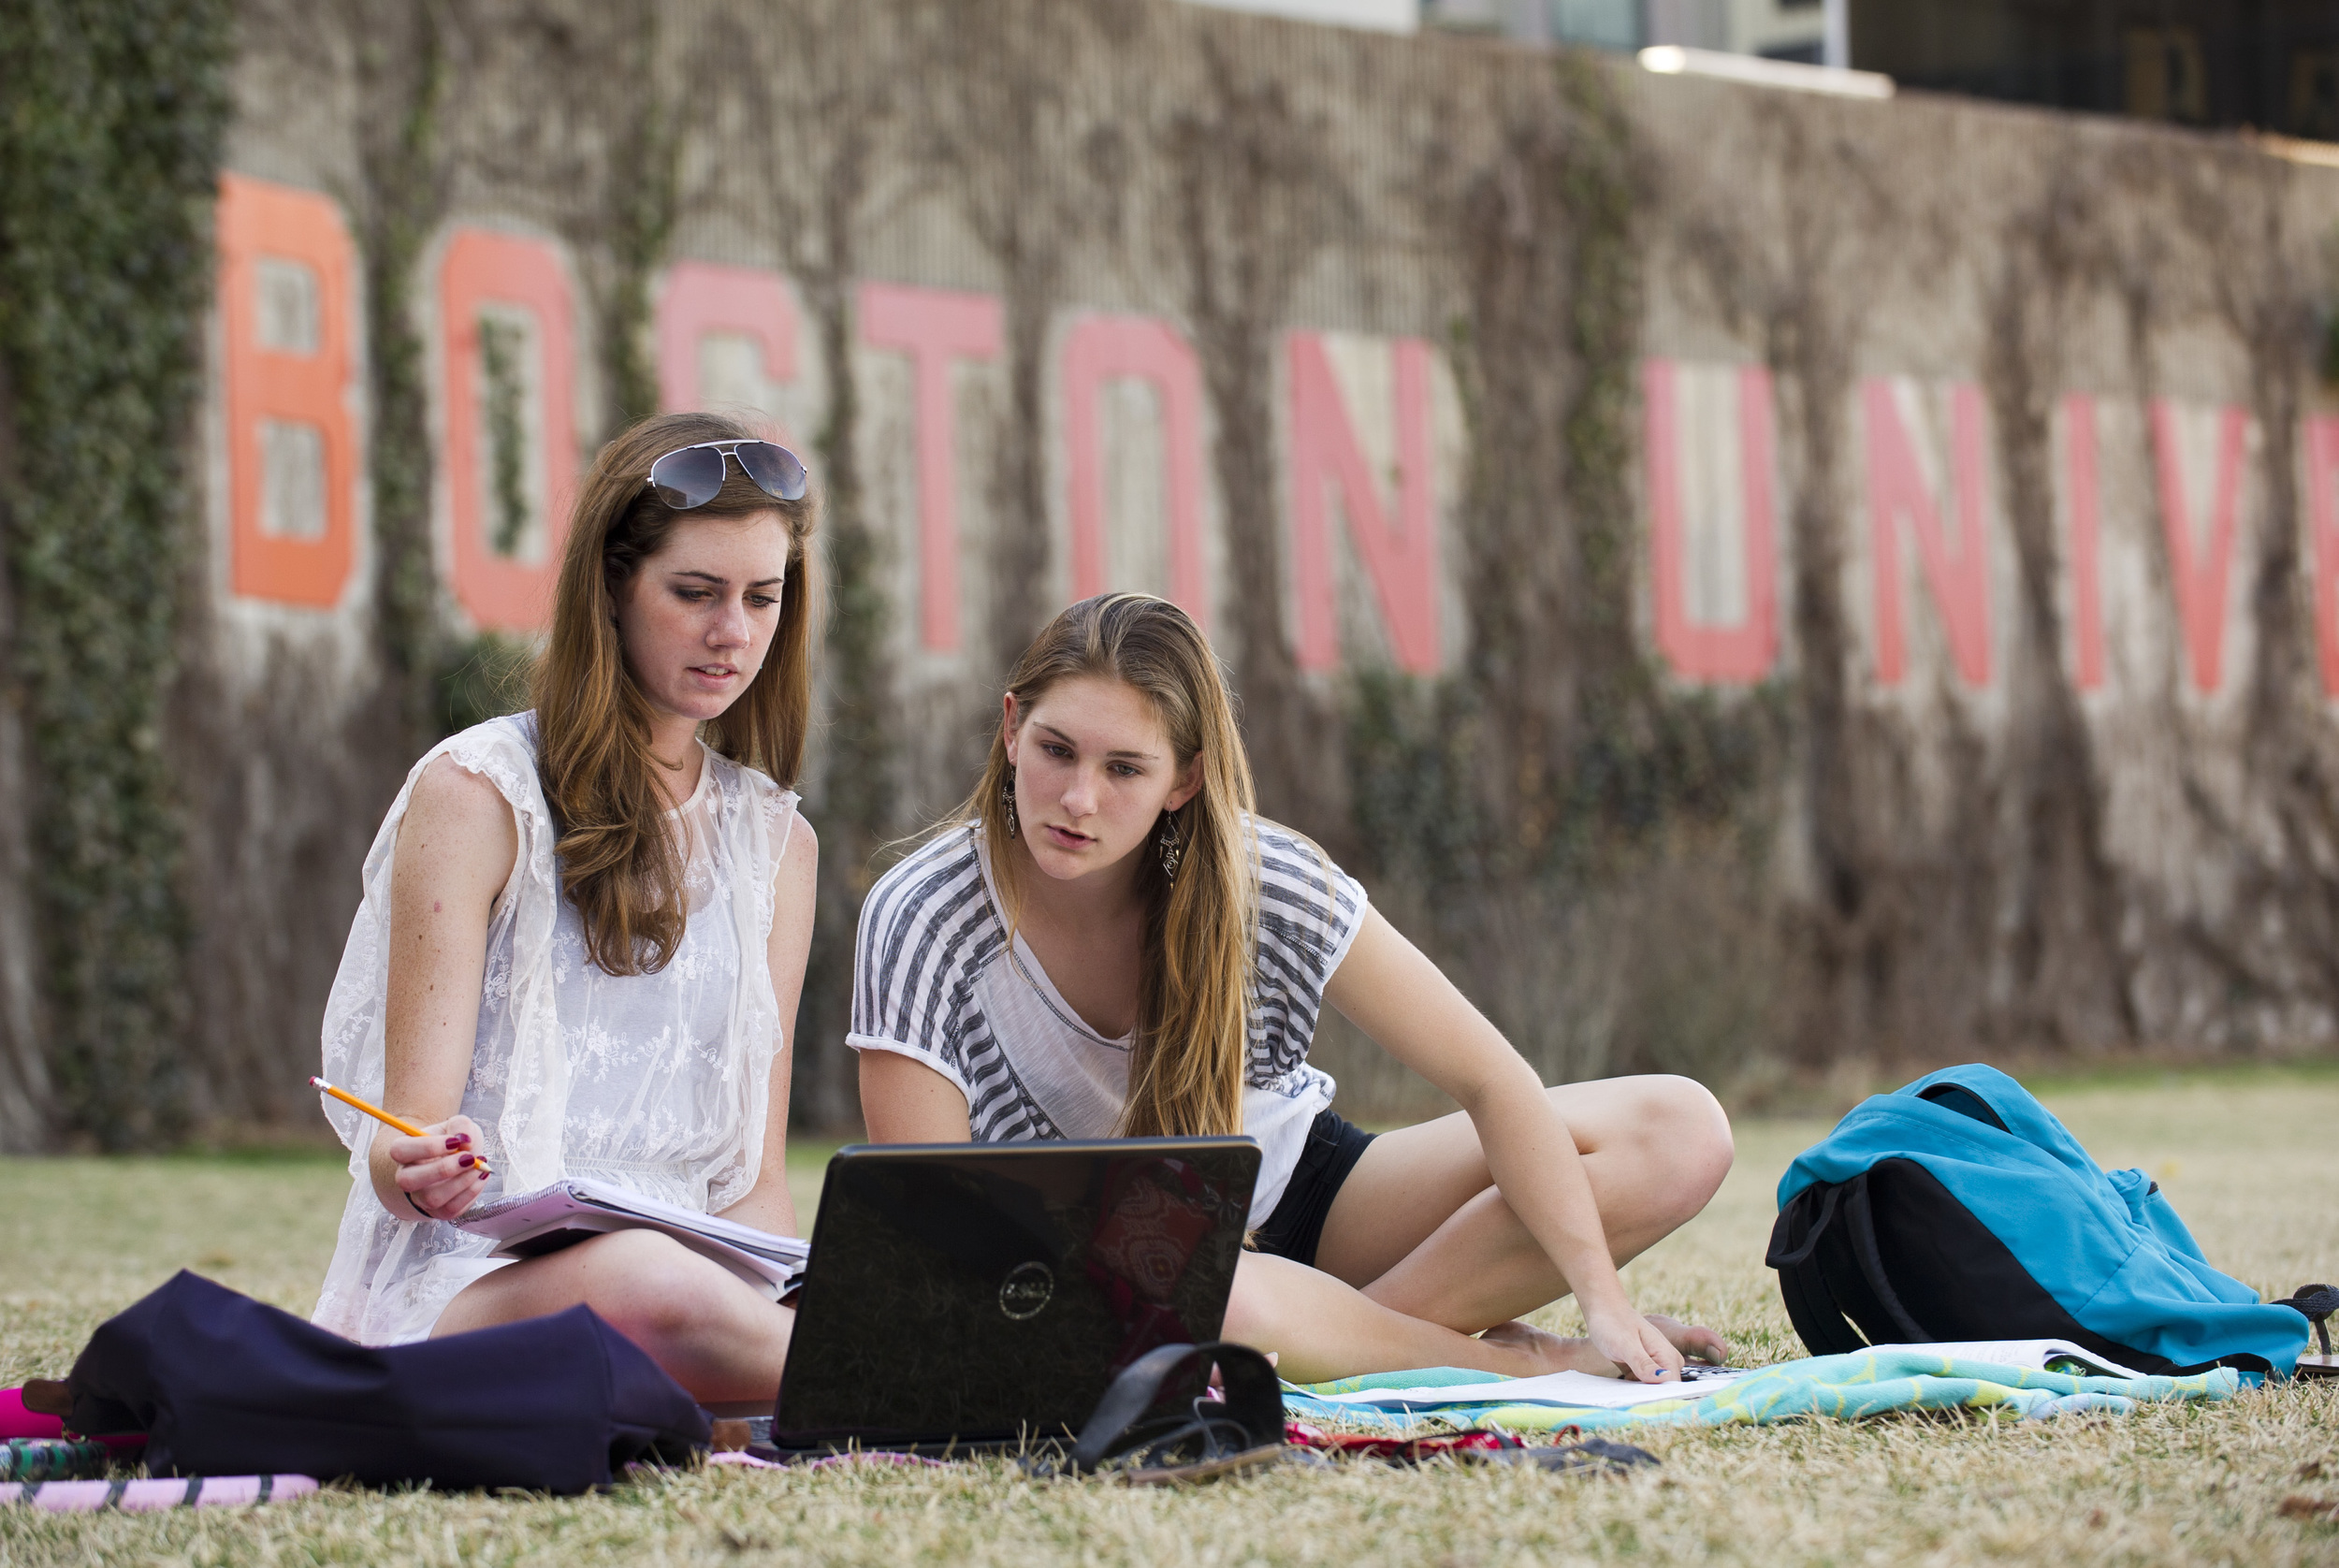  Kelsey Young (COM'15), left, and Boone Saunders (CAS'15) study statistics for class in the shade on Nickerson field. They had started in the sun, the two said, but it got too hot. &nbsp;Nickerson field March 22, 2012.&nbsp;  Photo by Cydney Scott fo